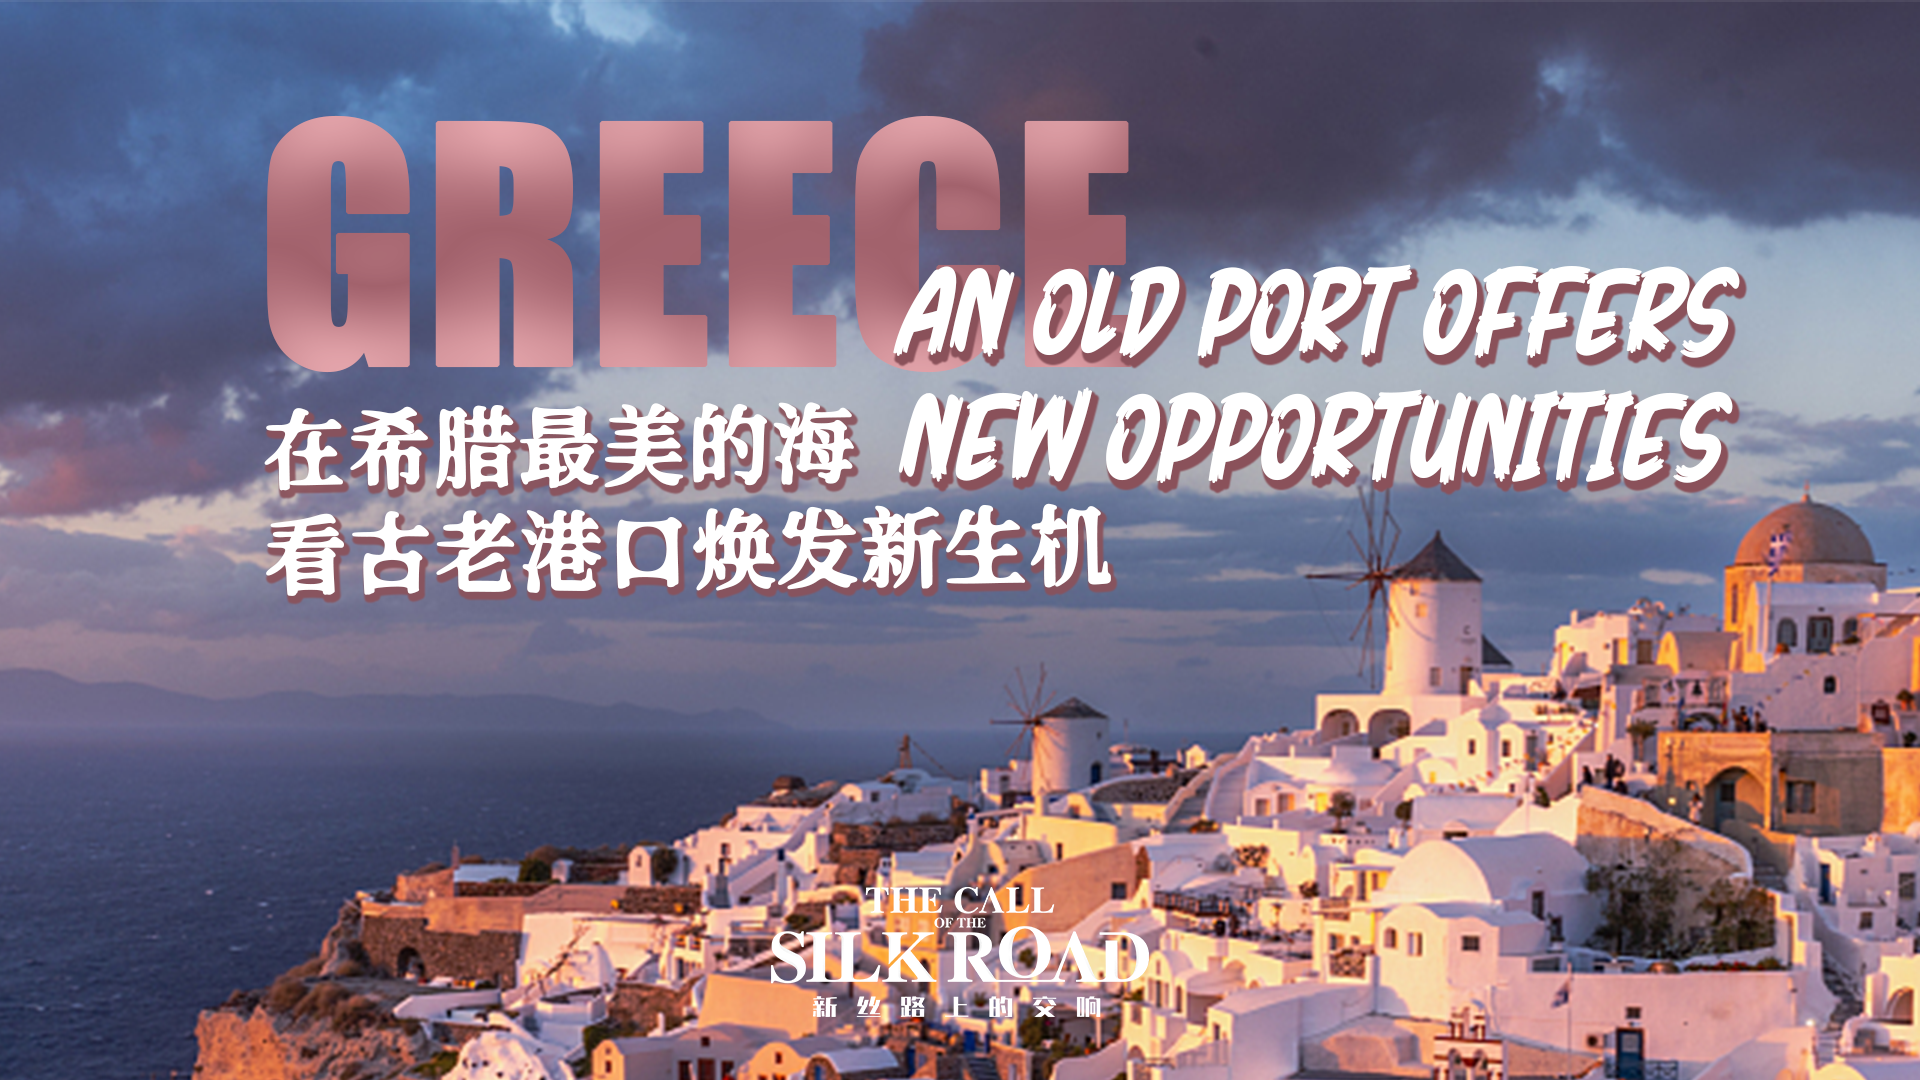 The Call of the Silk Road: An old Greek port offers new opportunities